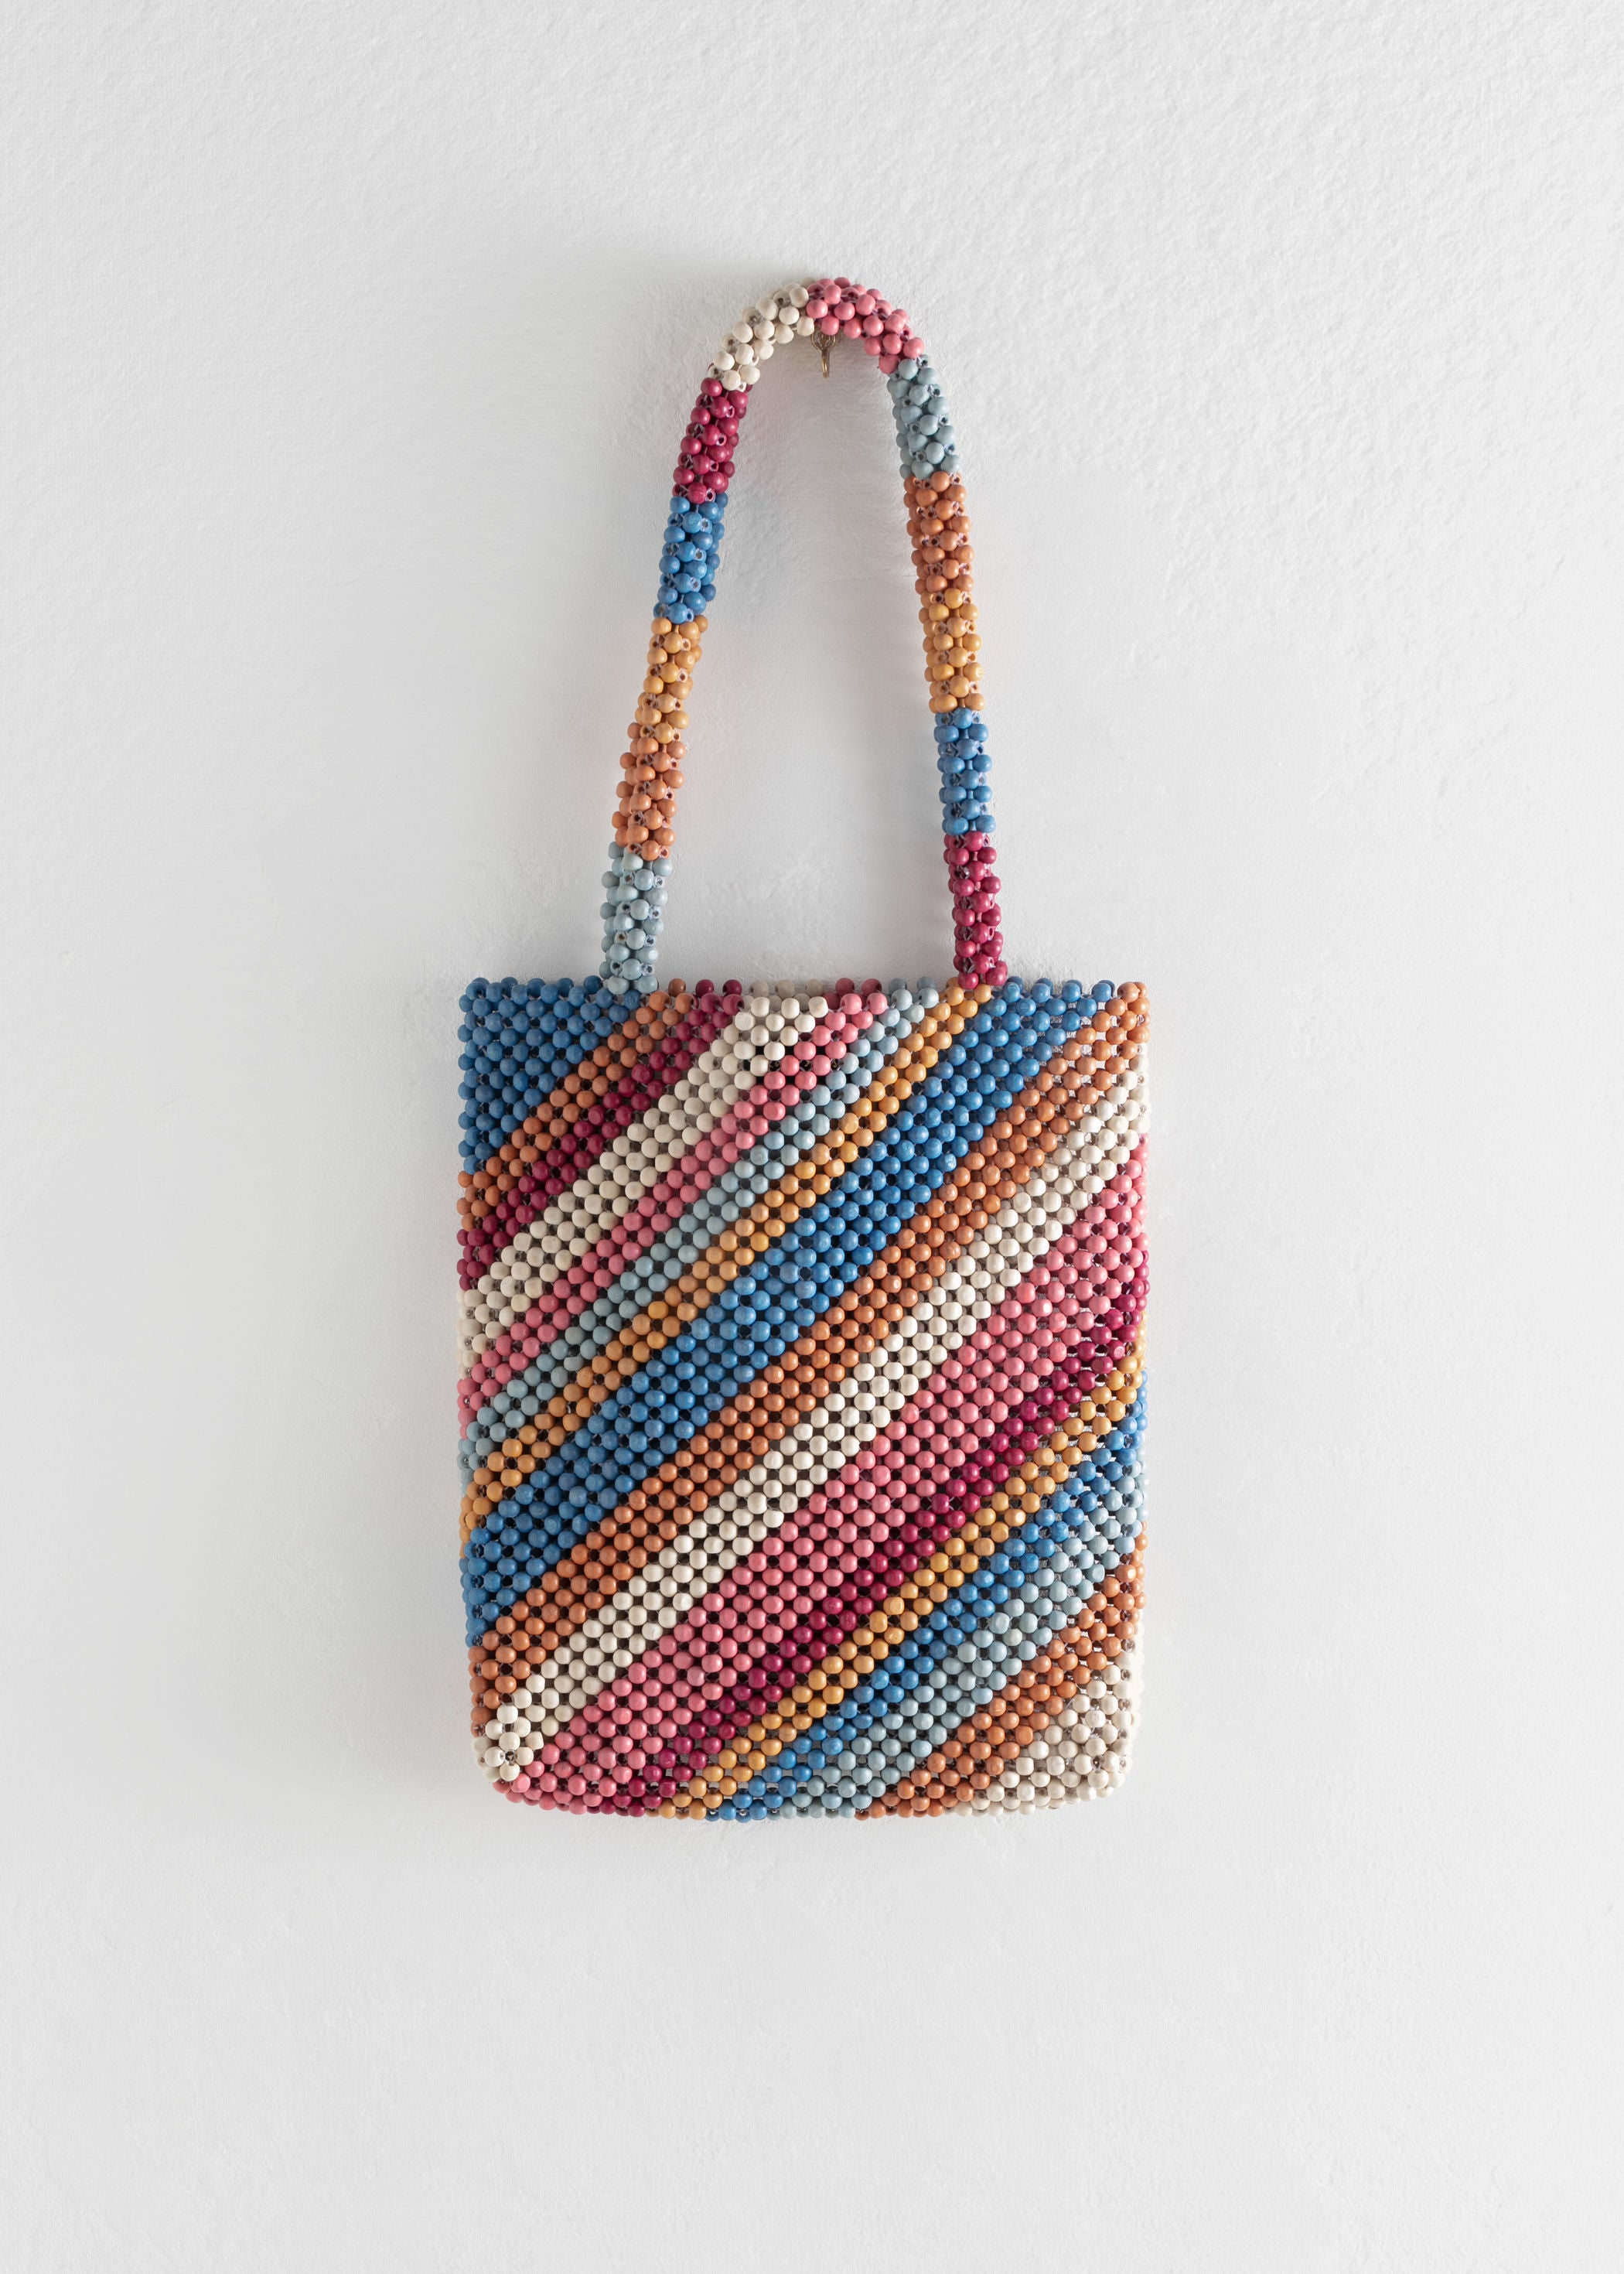 Details about   Knit's Cool Tote Purse 